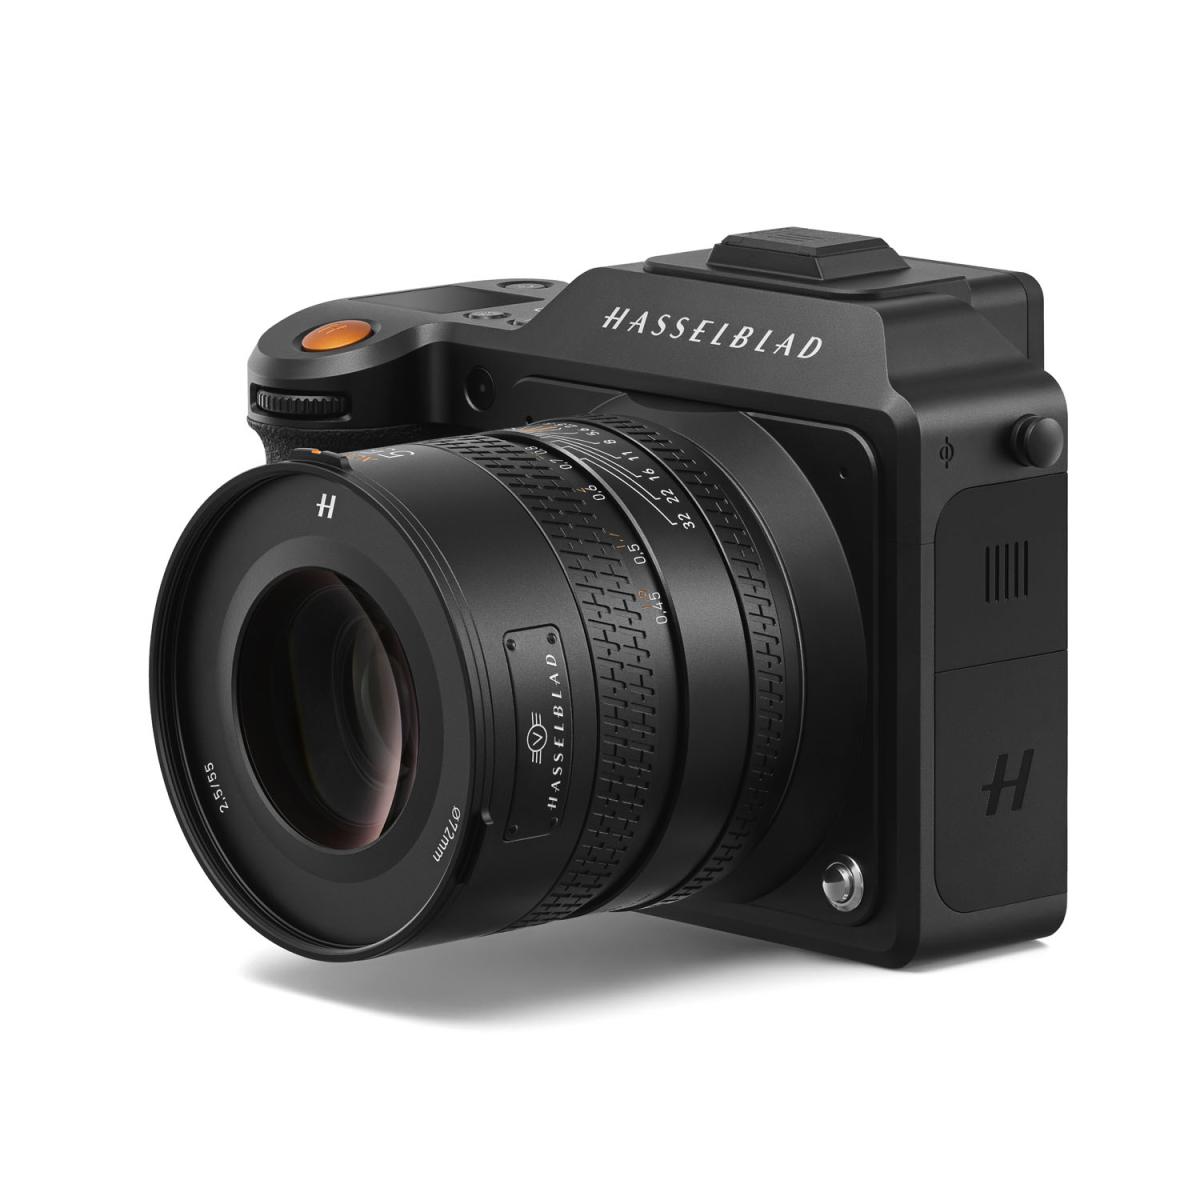 HASSELBLAD XCD 55mm/2.5V [Hasselblad X-system]   E72